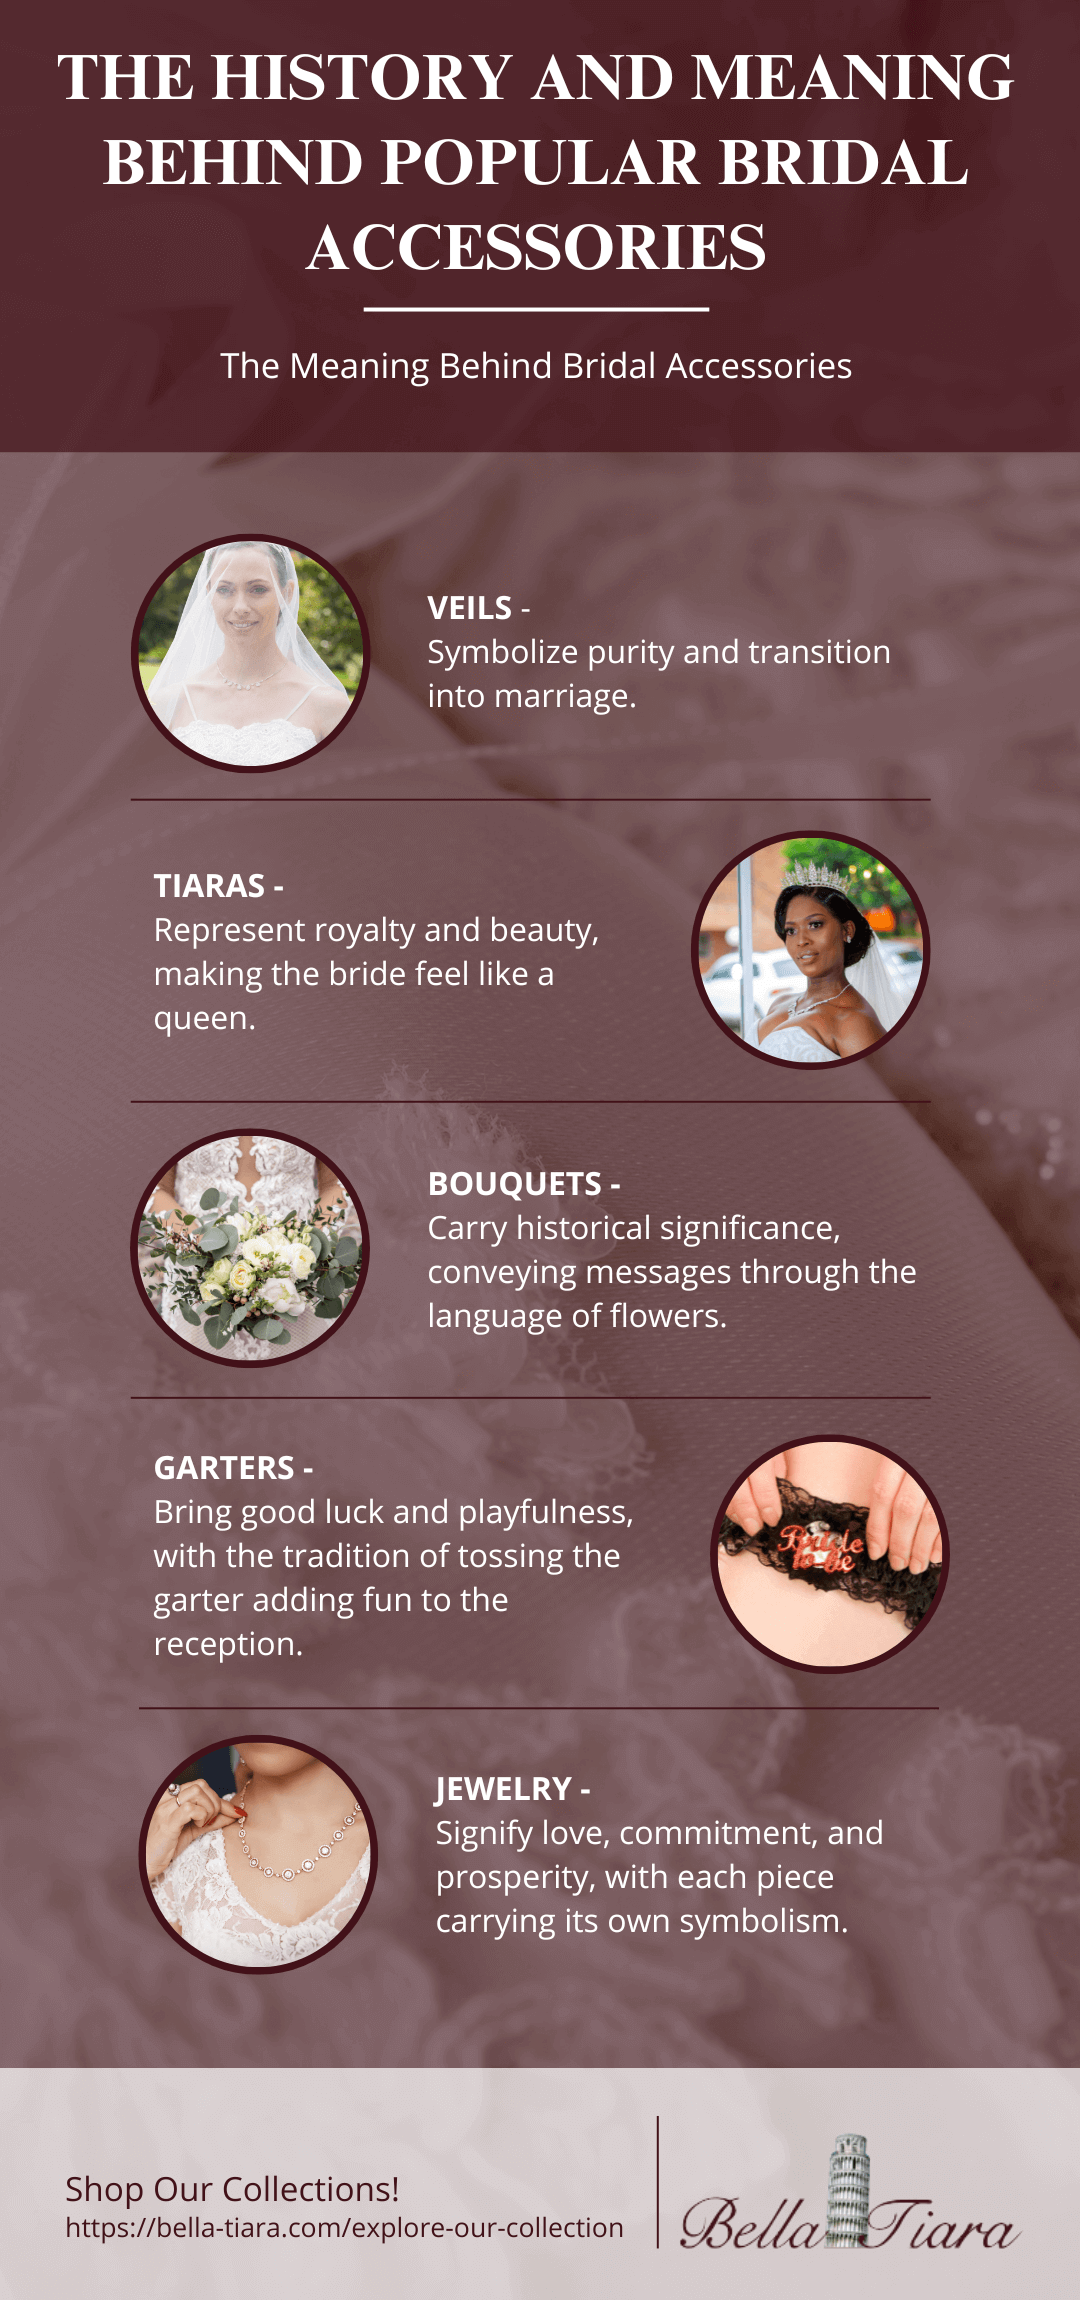 Infographic - The History and Meaning Behind Popular Bridal Accessories